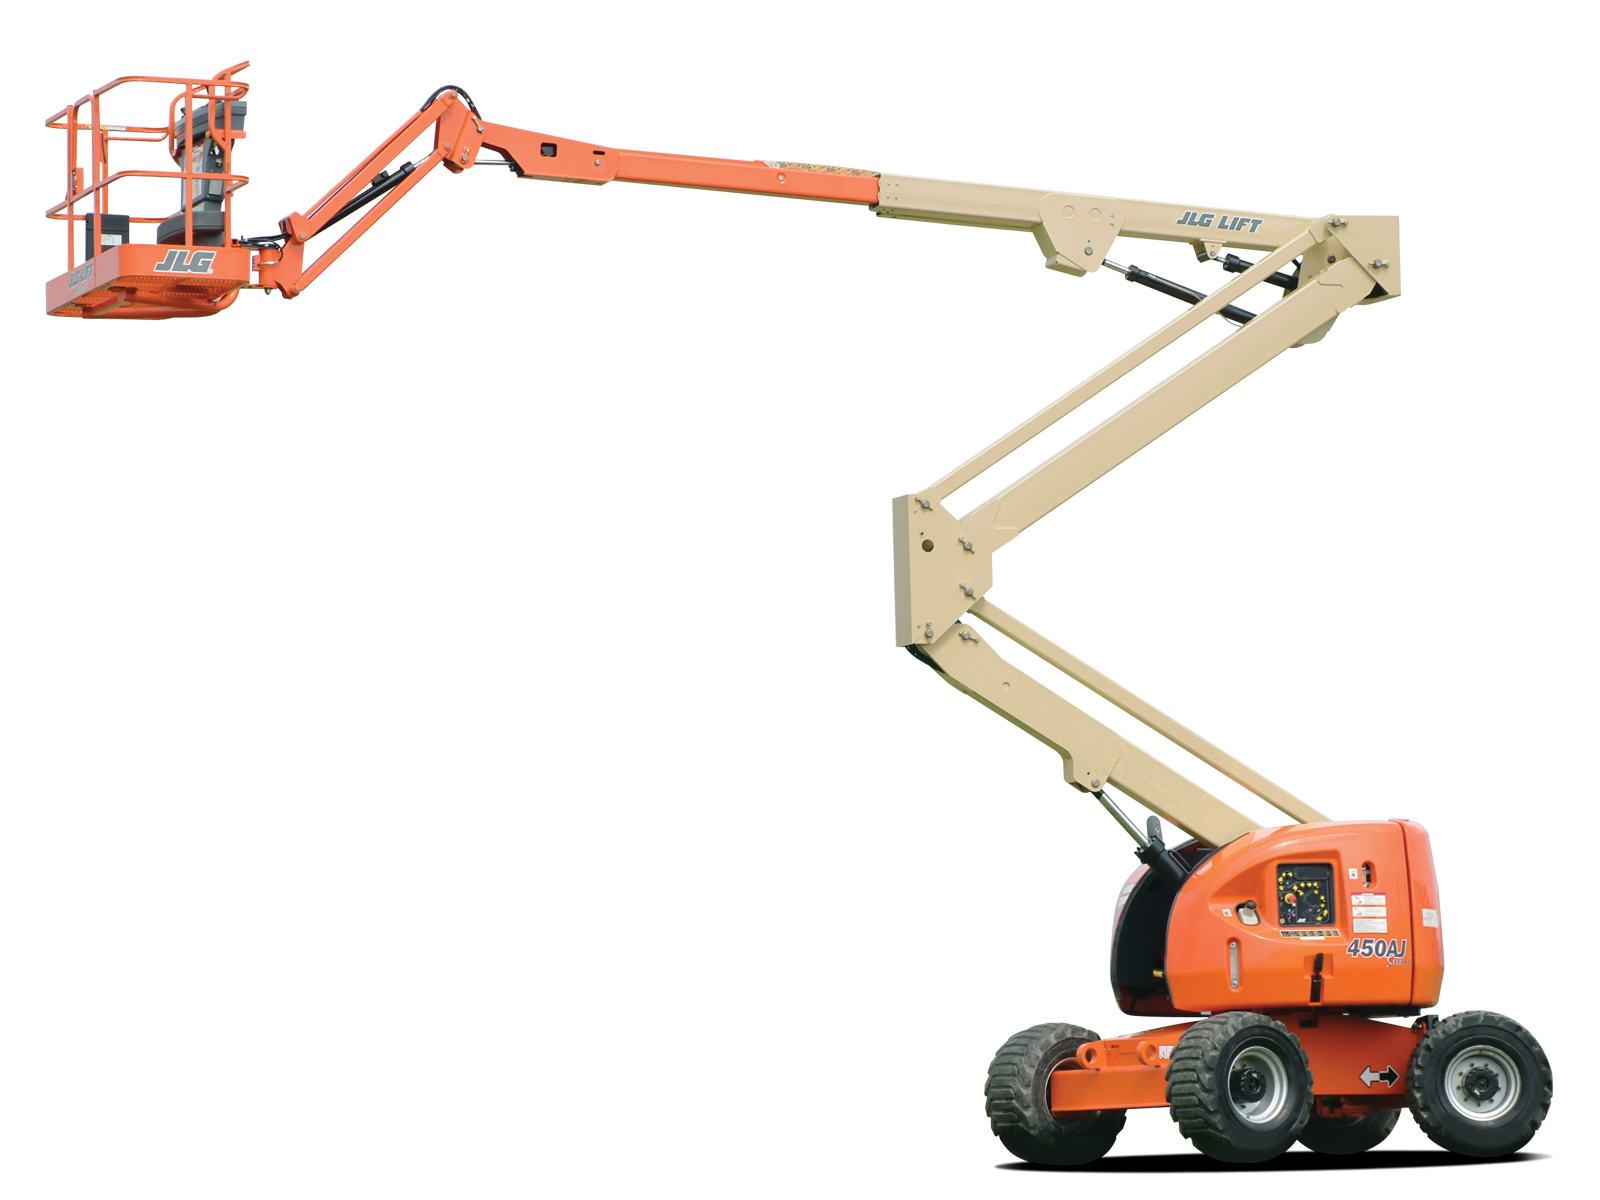 JLG 450AJ | Articulated Manlifts on Rent | WESTERN INDIA SKY LIFTER